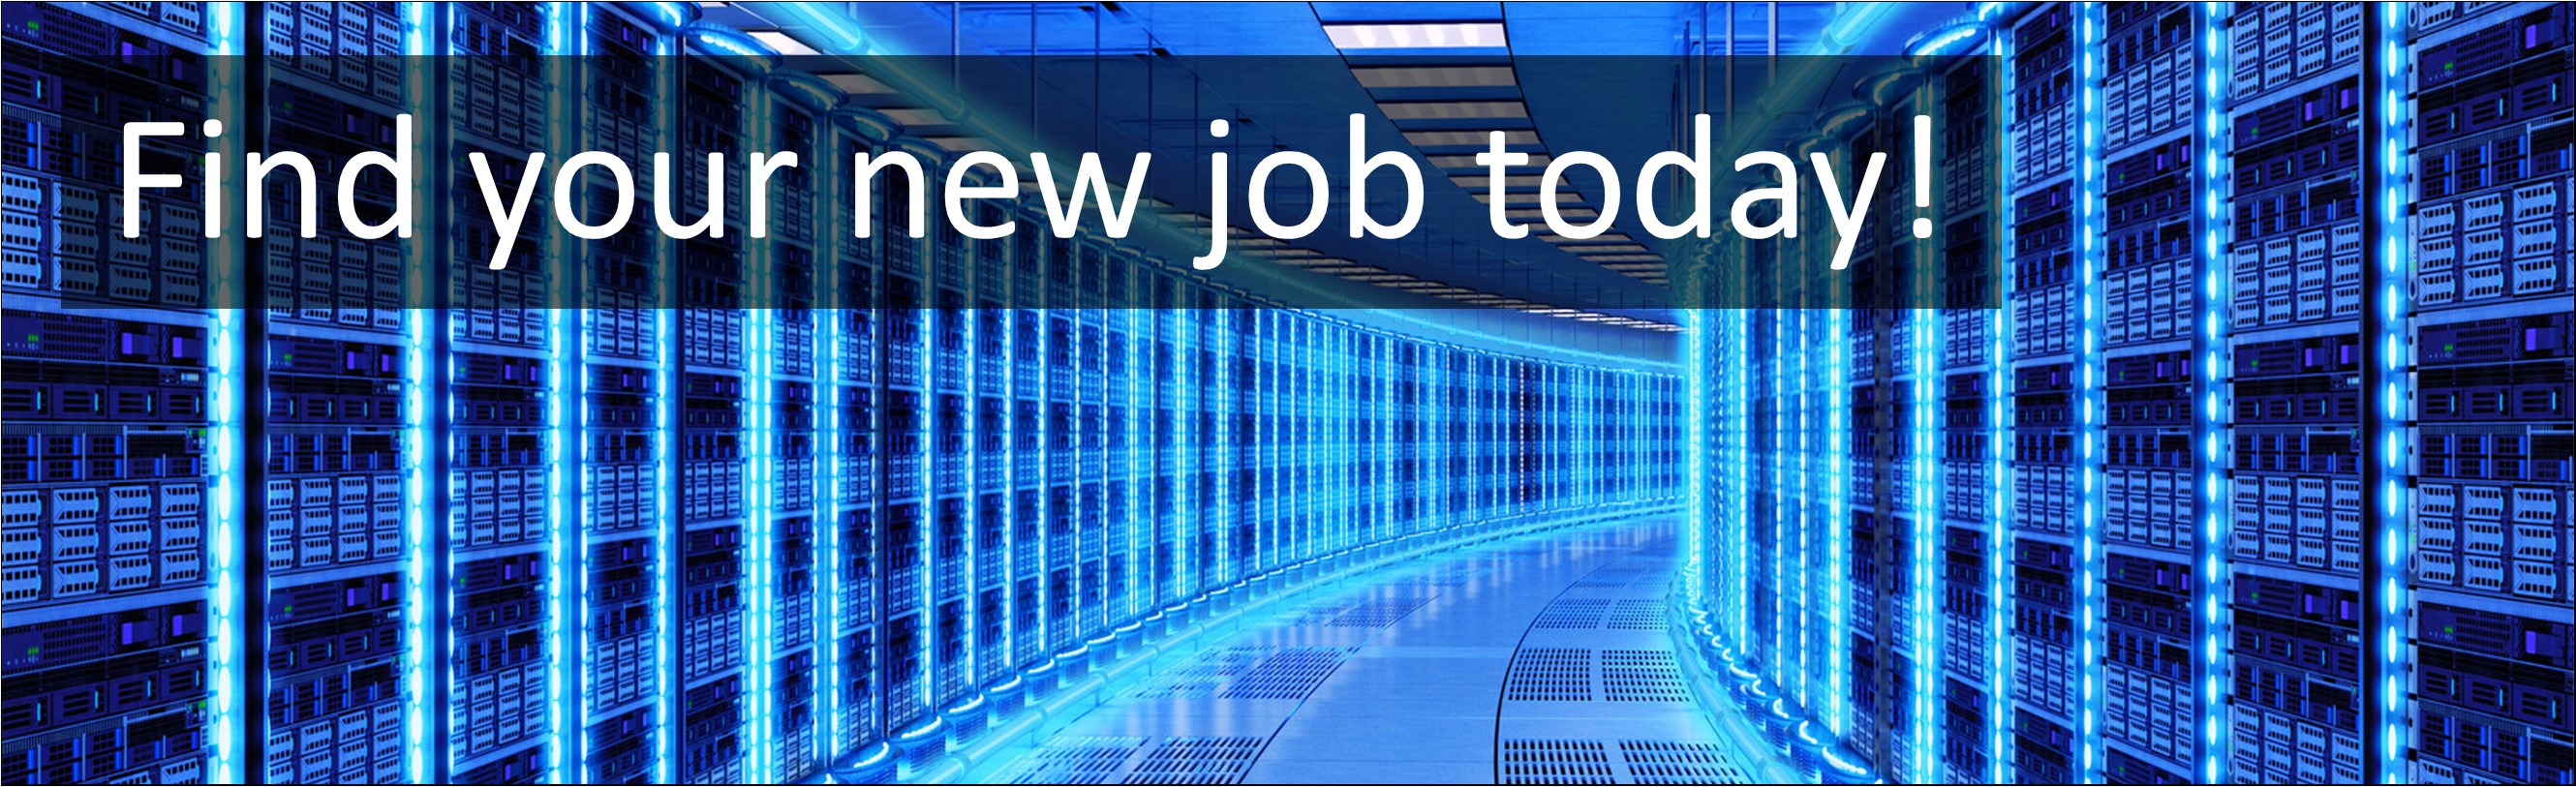 IT & Communication Jobs. IT Technical Support Field Service Engineer Jobs, Careers & Vacancies in North West England Advertised by AWD online – Multi-Job Board Advertising and CV Sourcing Recruitment Services